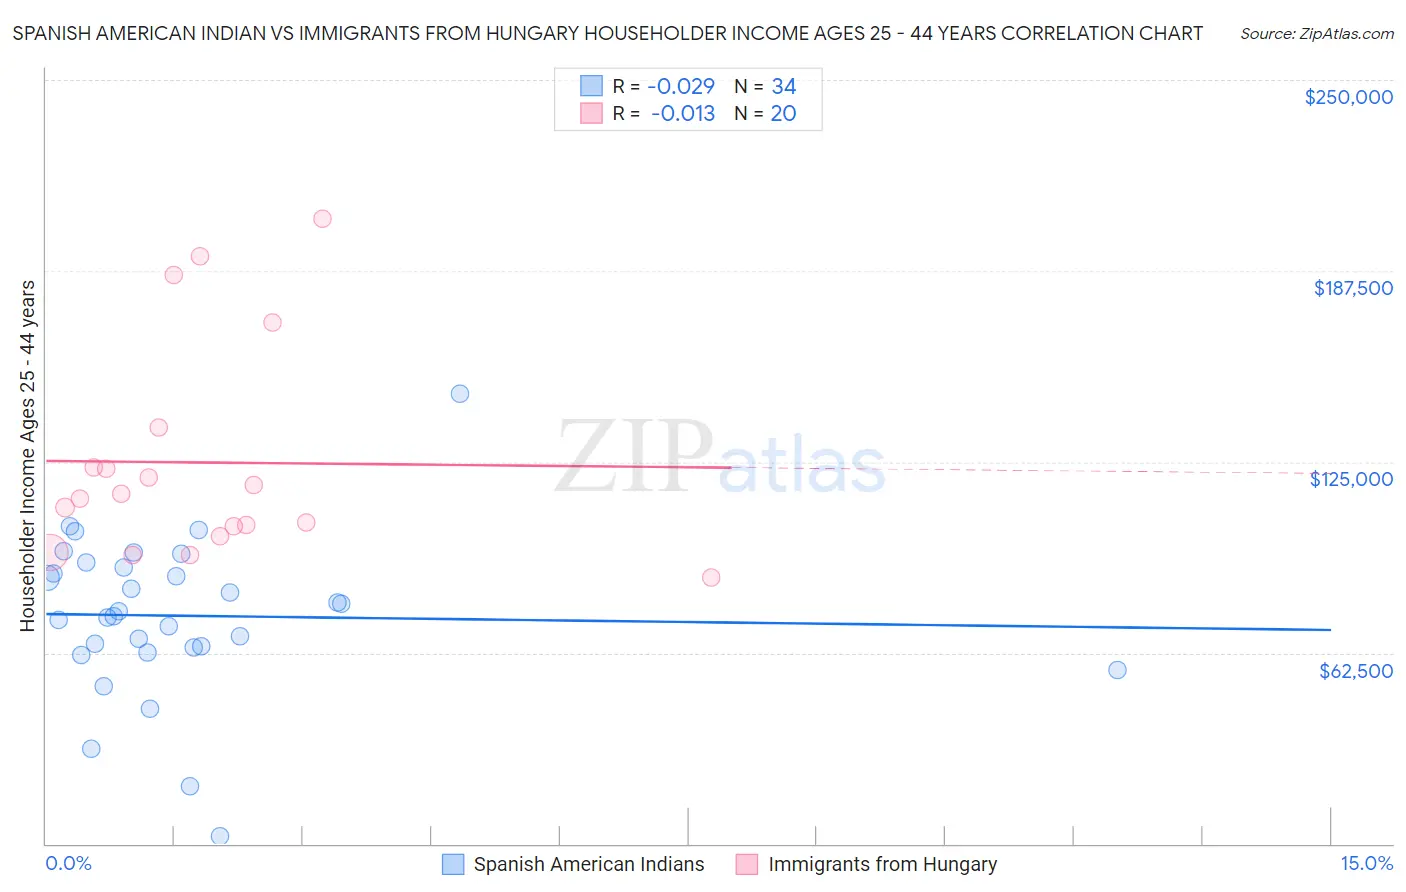 Spanish American Indian vs Immigrants from Hungary Householder Income Ages 25 - 44 years